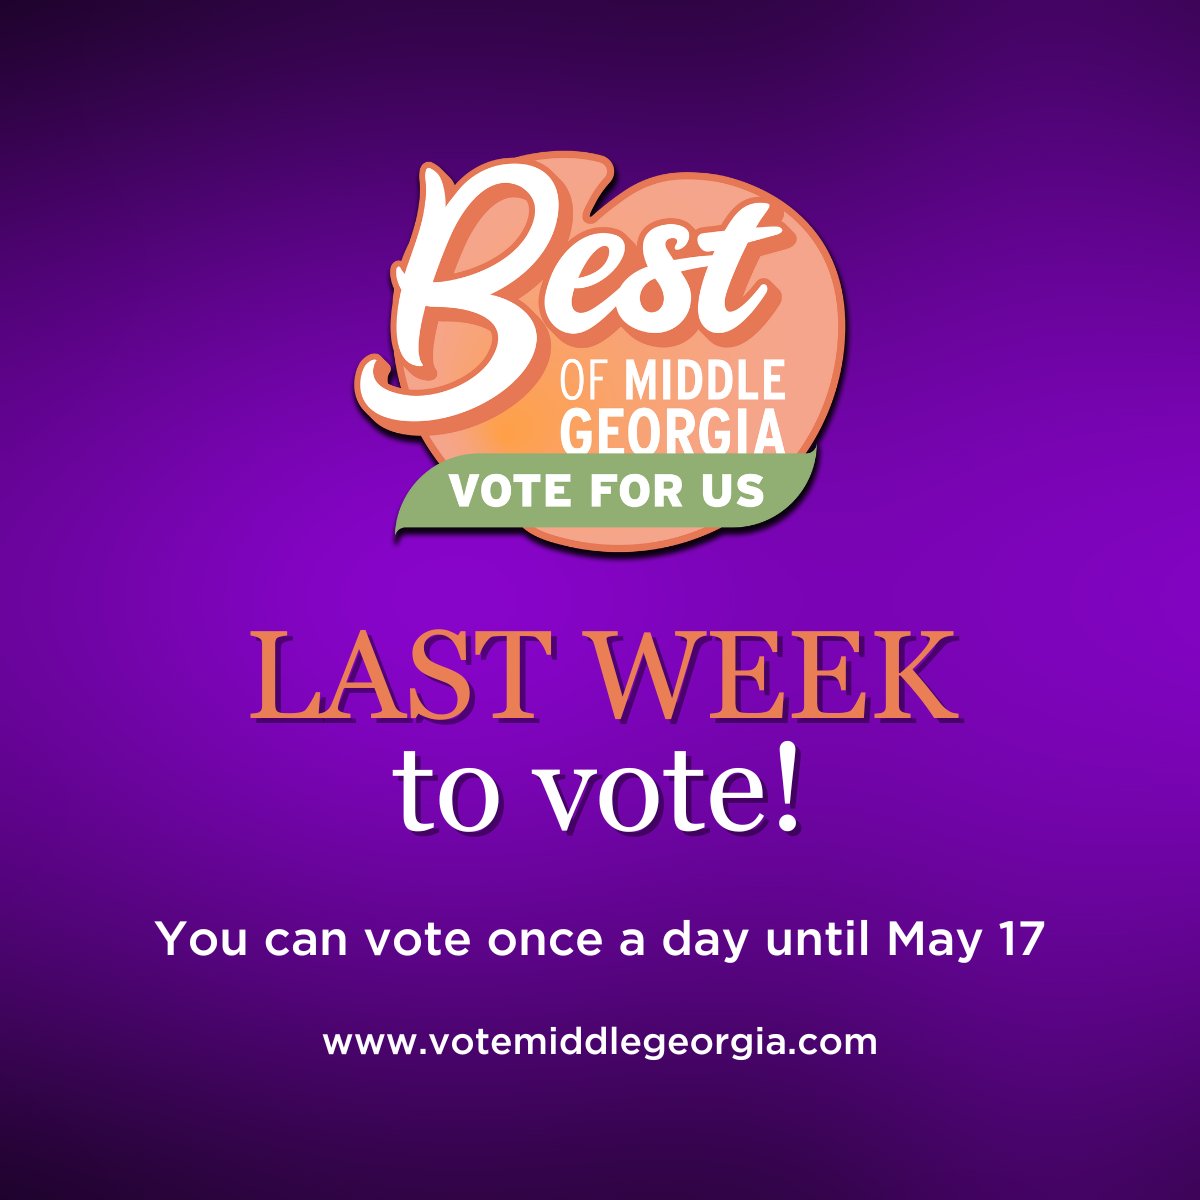 Last week to vote for Best of Middle Georgia!

Please visit votemiddlegeorgia.com and vote for Dr. Jeremiah McClure AND MCC Internal Medicine. MCC thanks everyone so much!

Voting runs though May 17th and you can vote once a day!

#BestofMiddleGeorgia